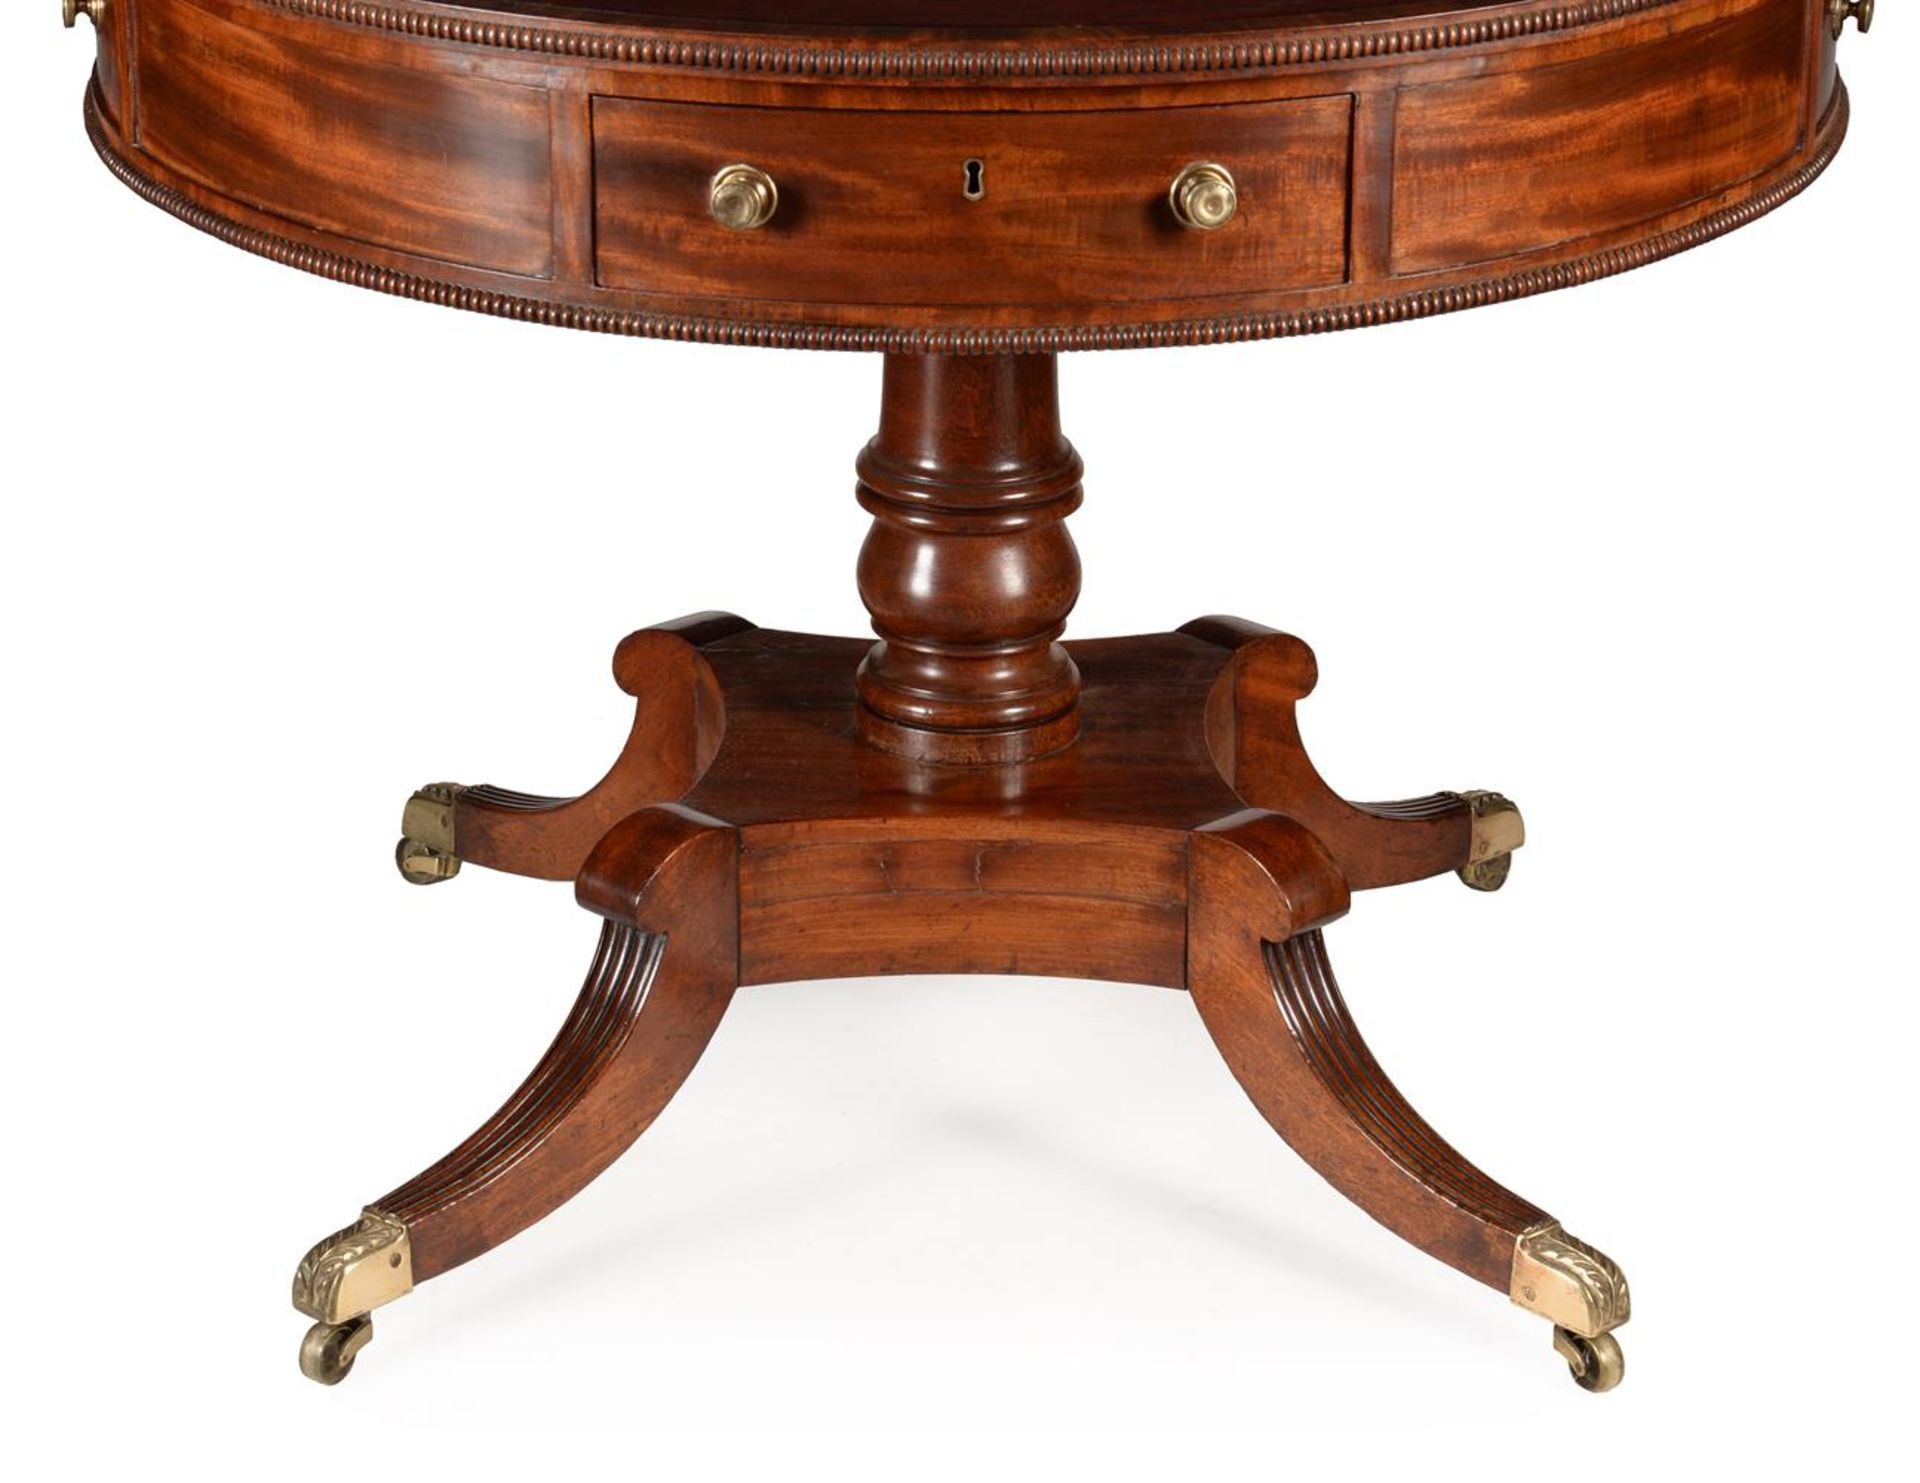 A REGENCY MAHOGANY DRUM LIBRARY TABLE, ATTRIBUTED TO GILLOWS, CIRCA 1815 - Image 3 of 5